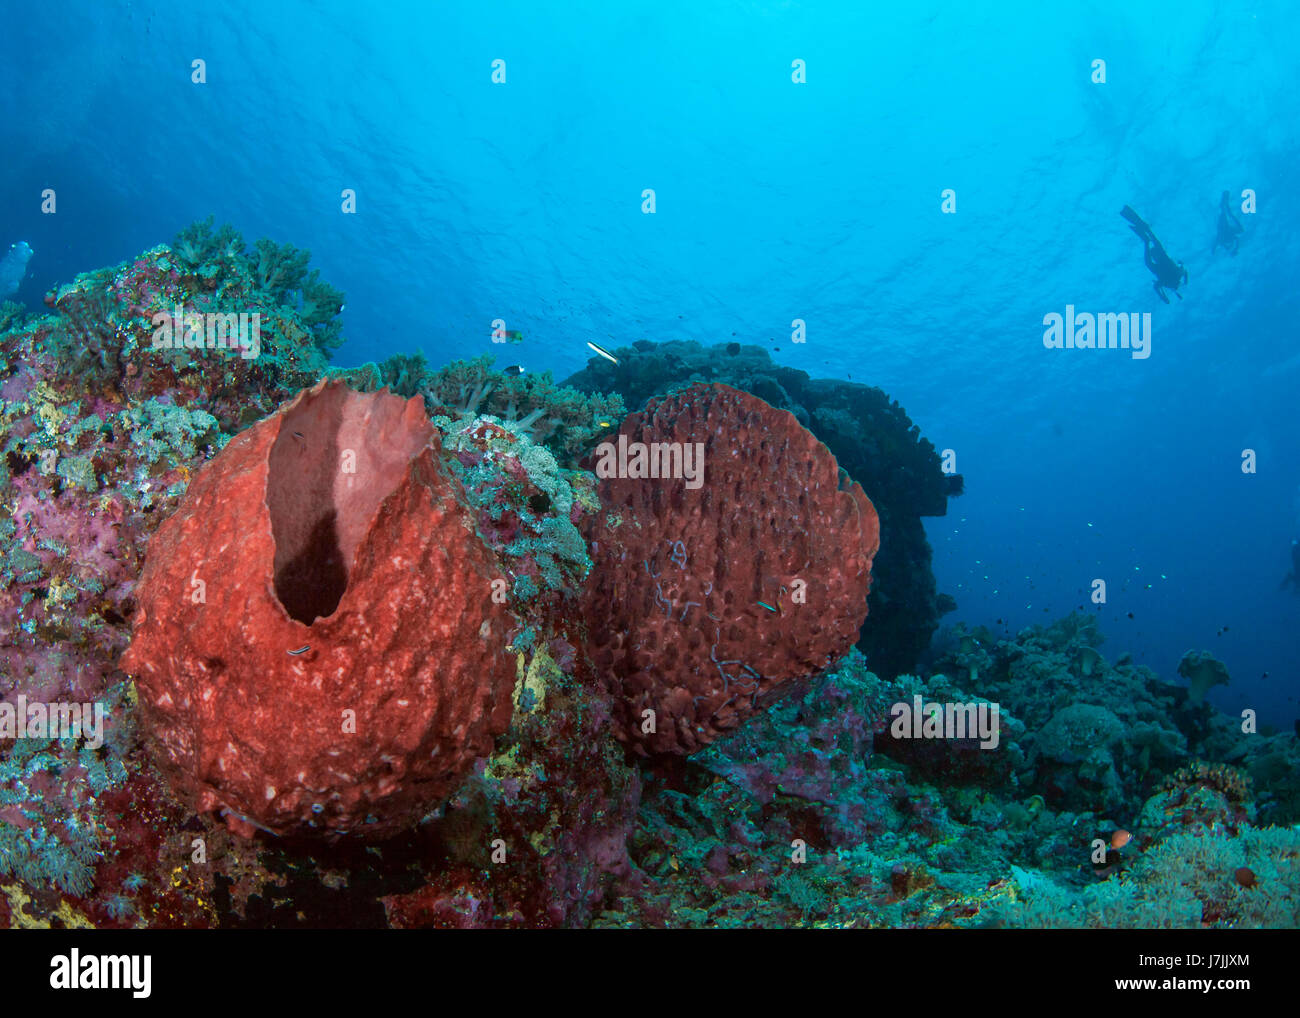 Seascape of giant red barrel sponges with diver silhouettes in blue water background. Spratly Islands, South China Sea. Stock Photo